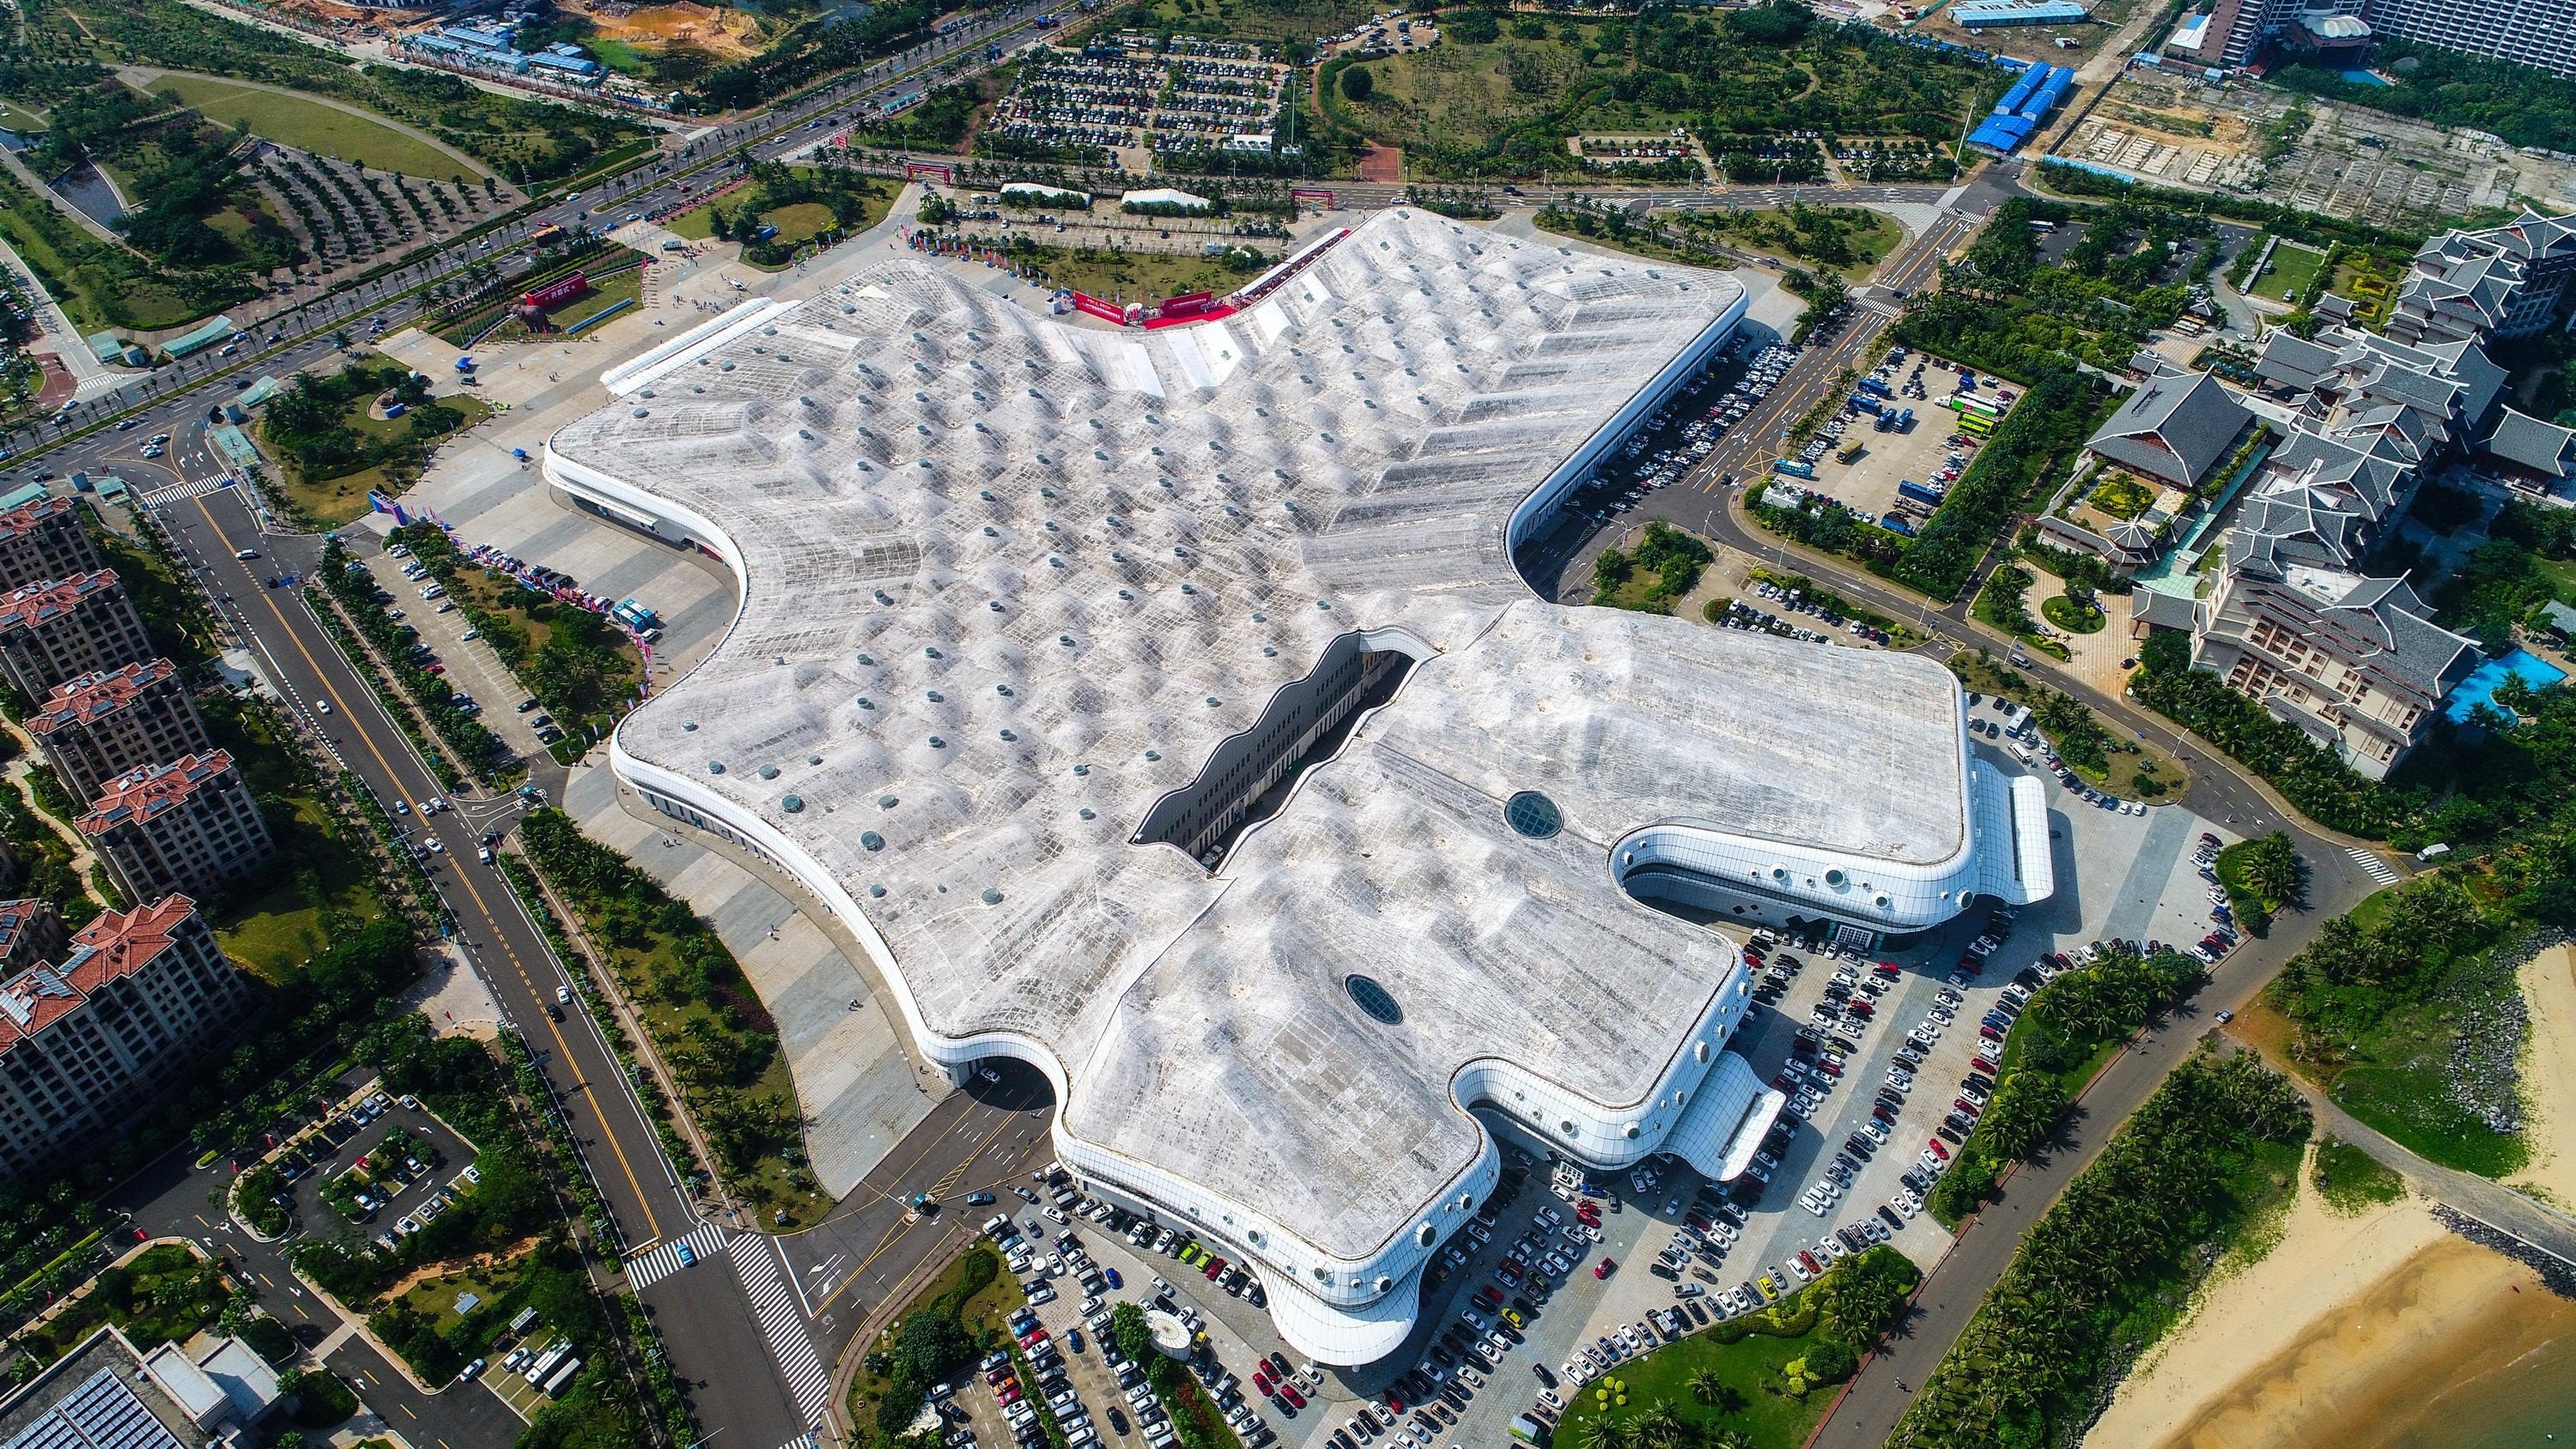 Hainan International Convention and Exhibition Center cost 1.38 billion yuan to build.